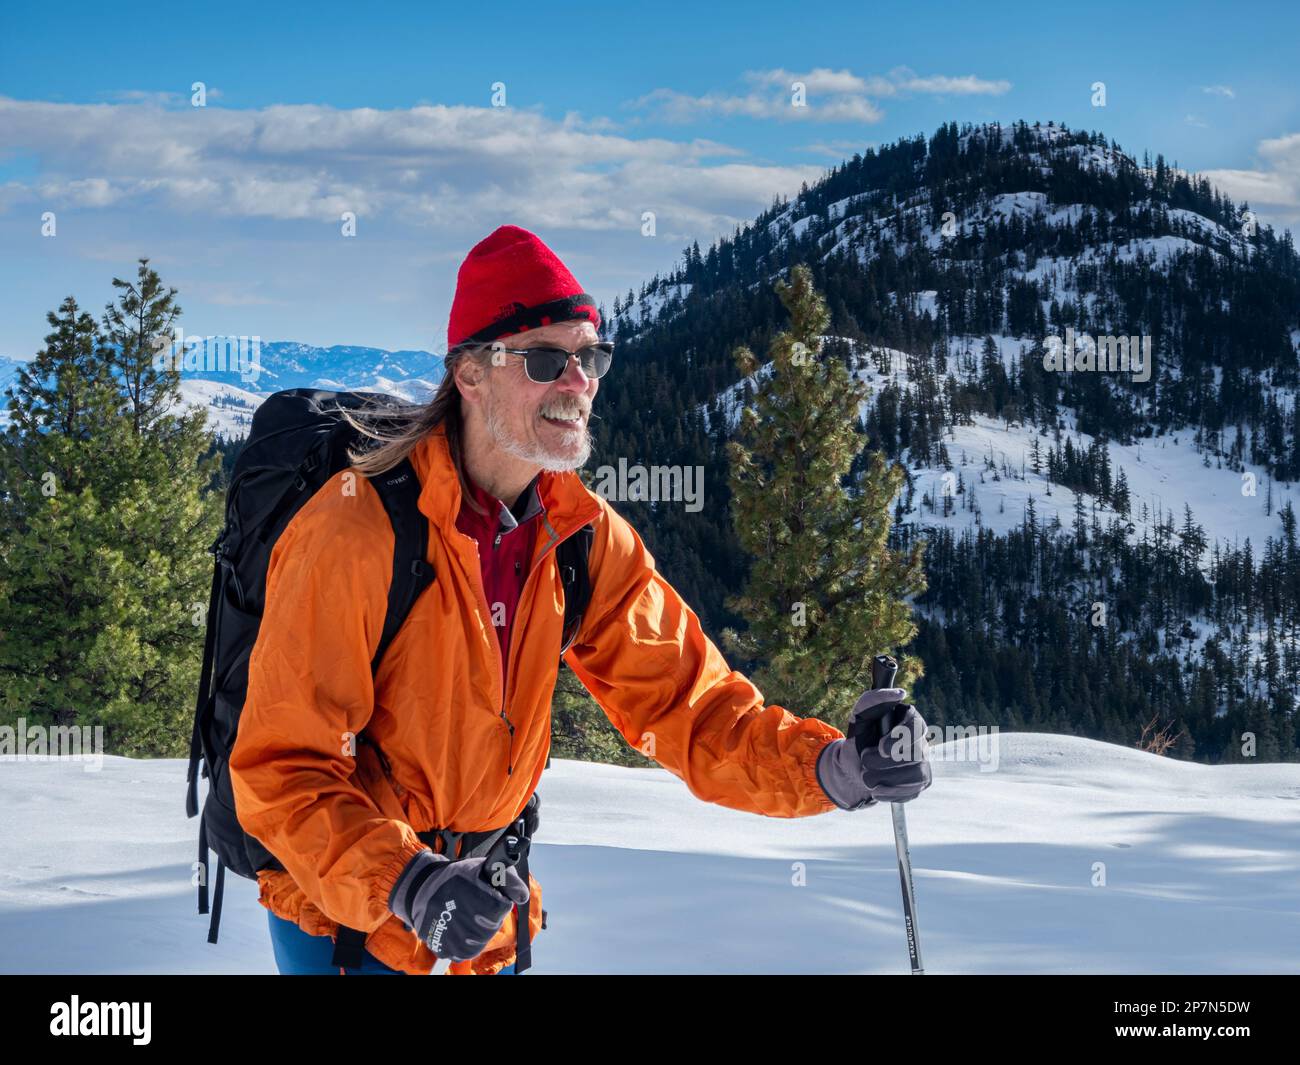 WA23242-00...WASHINGTON - Cross-country skier enjoying the afternoon sunshine and views from the Cassal Hut Trail in the Rendezvous area. Stock Photo